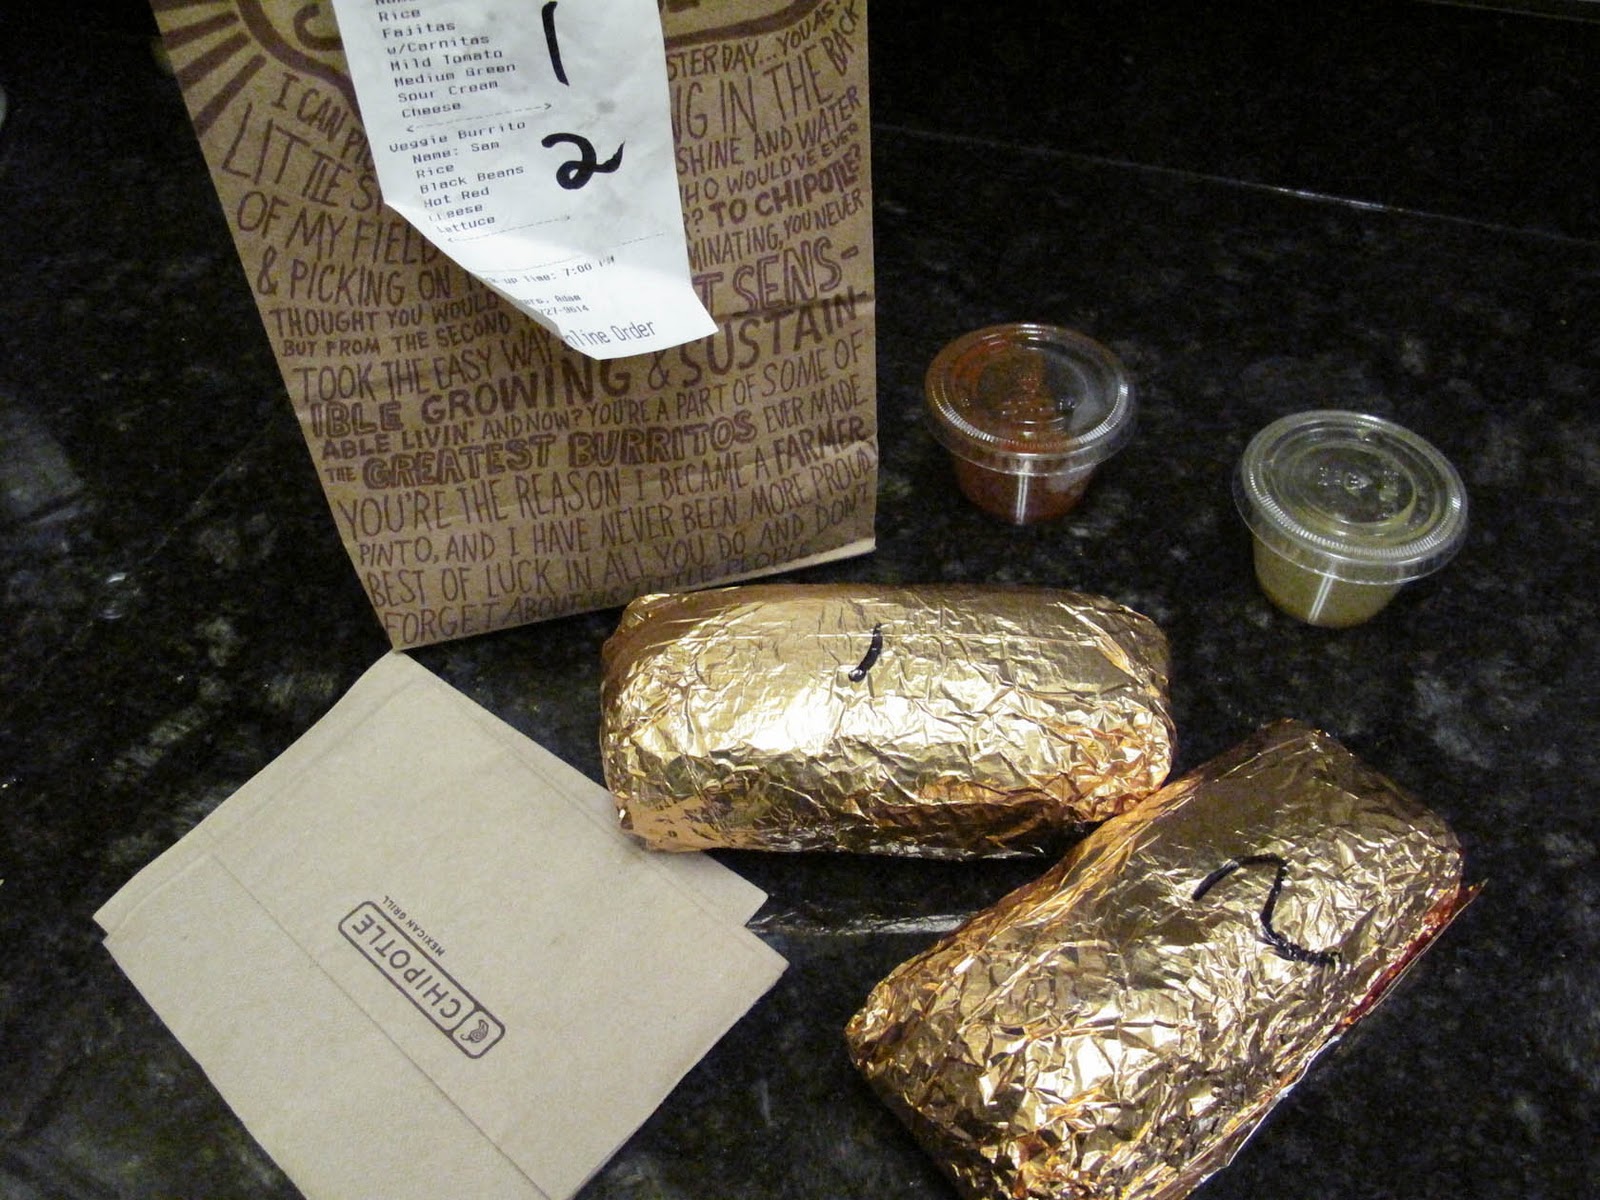 Chipotle Burritos Will Now Be Wrapped In Gold Foil For The Olympics